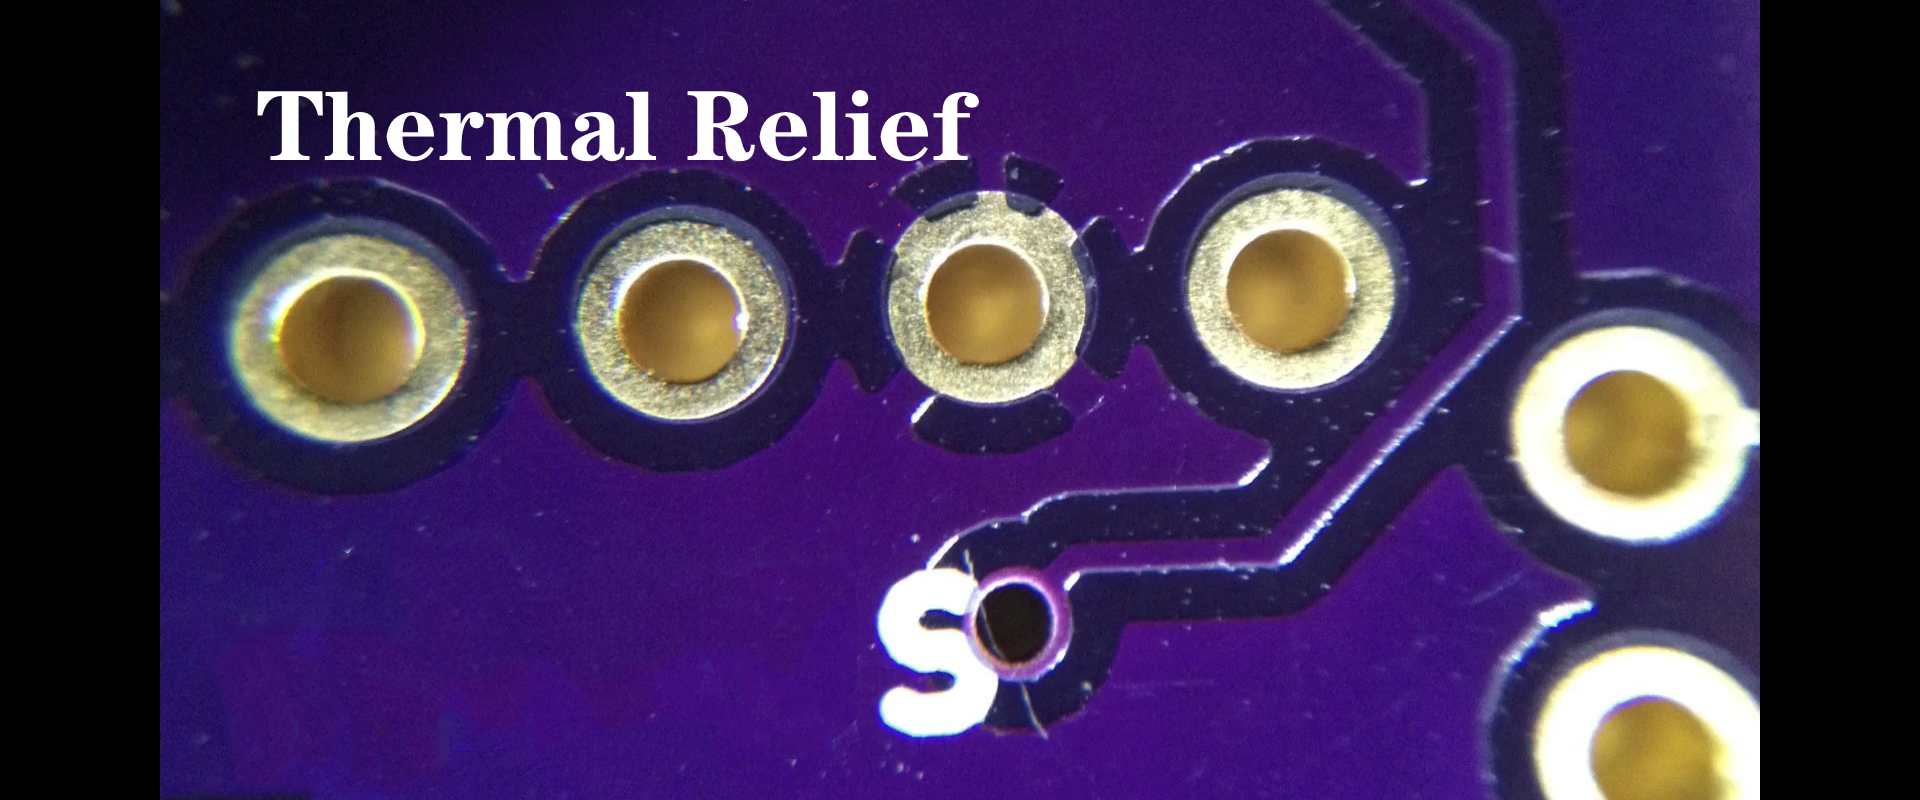 Thermal-Relief-PCB